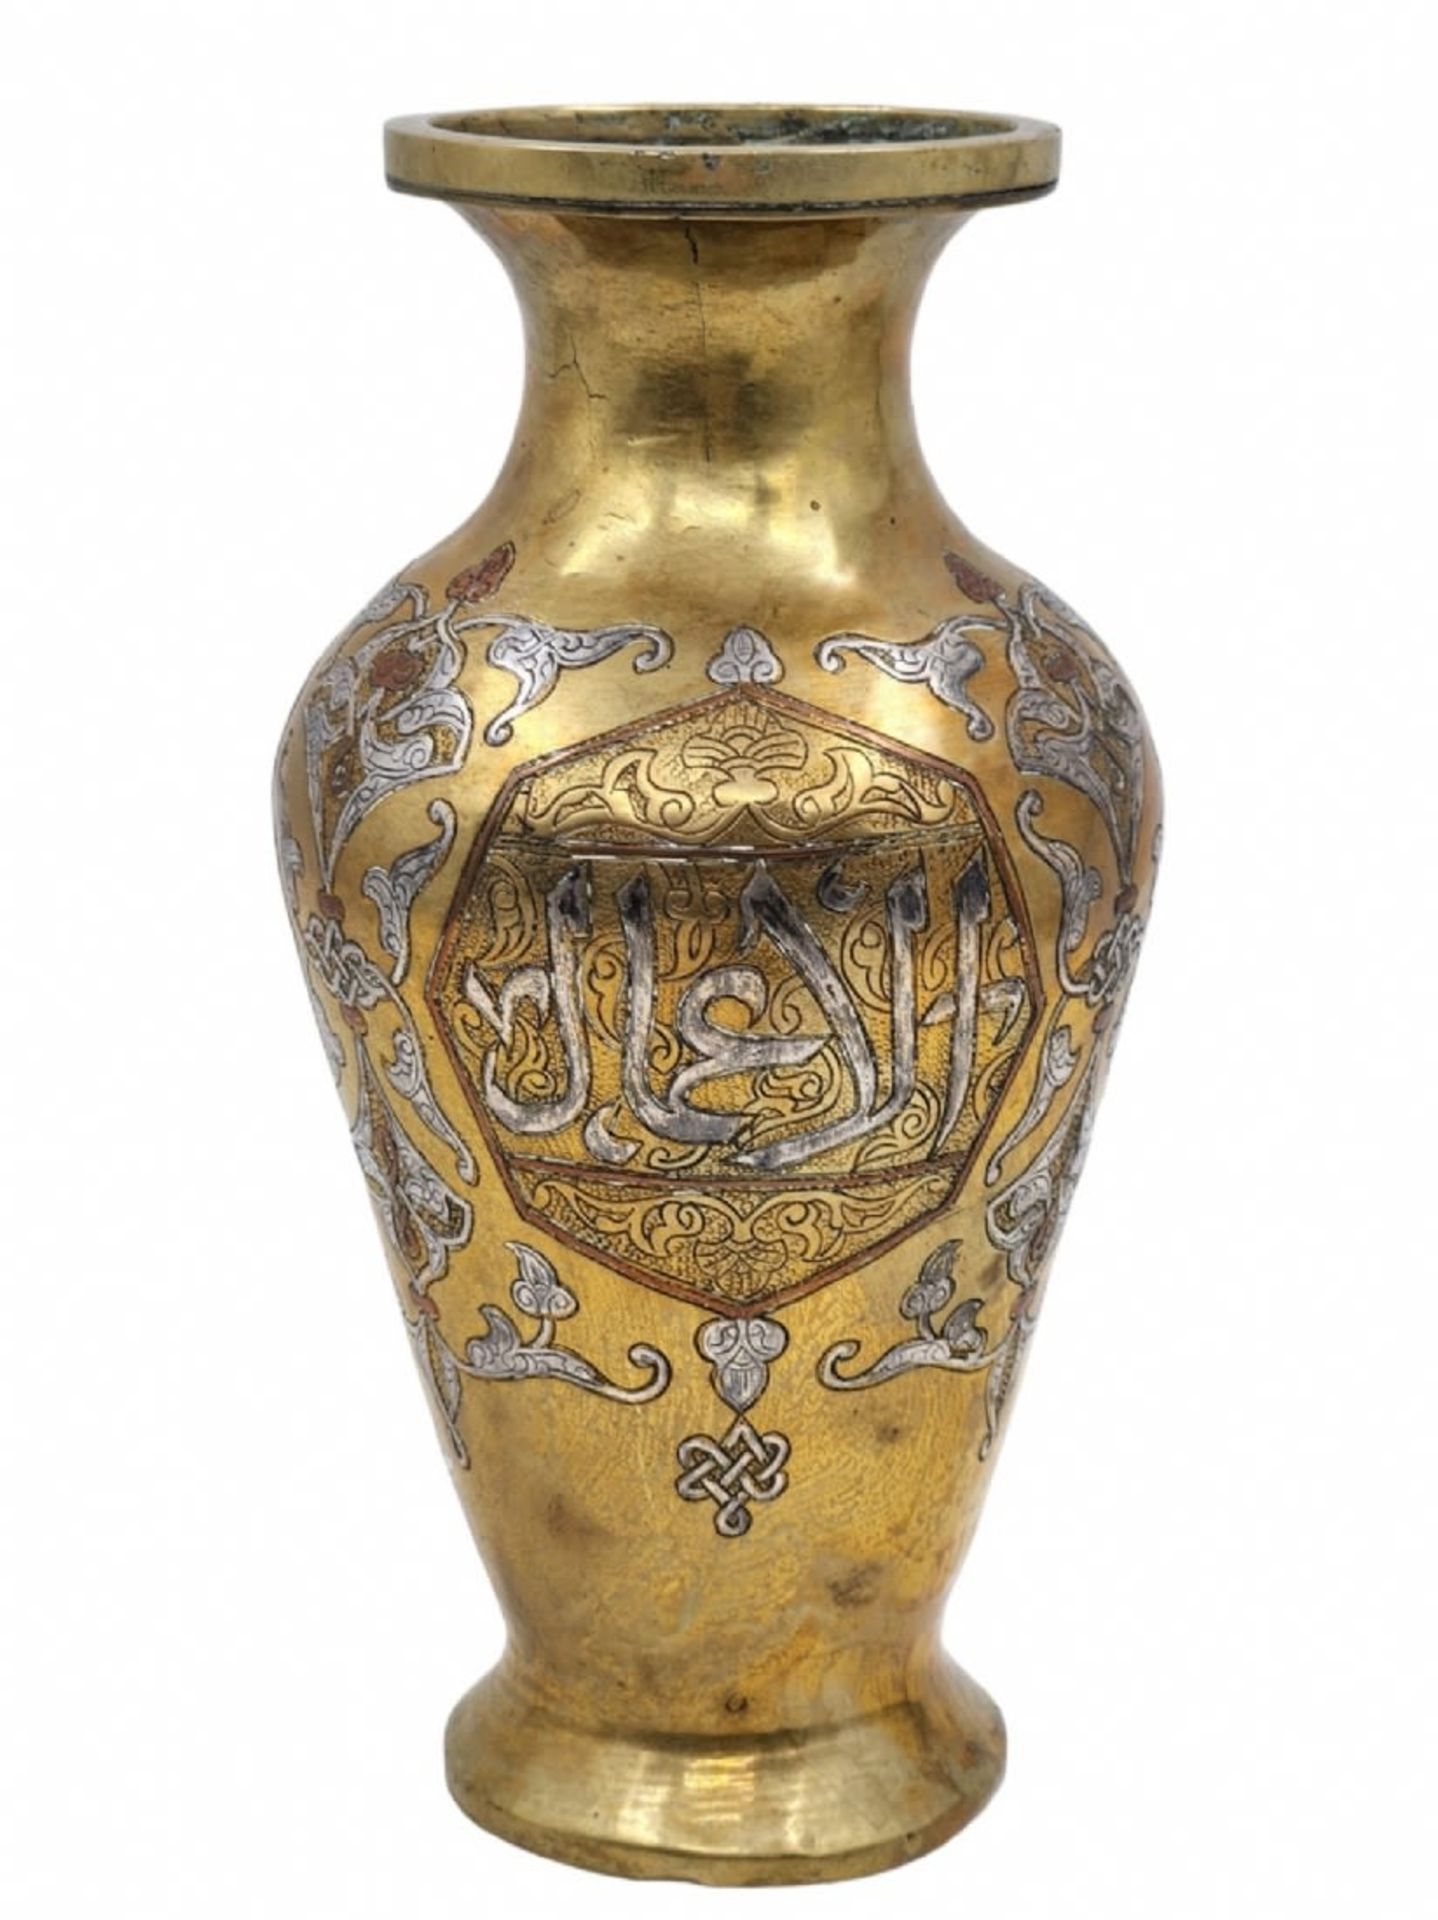 An antique Islamic vase, approximately hundred years old, made of Damascus work (copper and silver